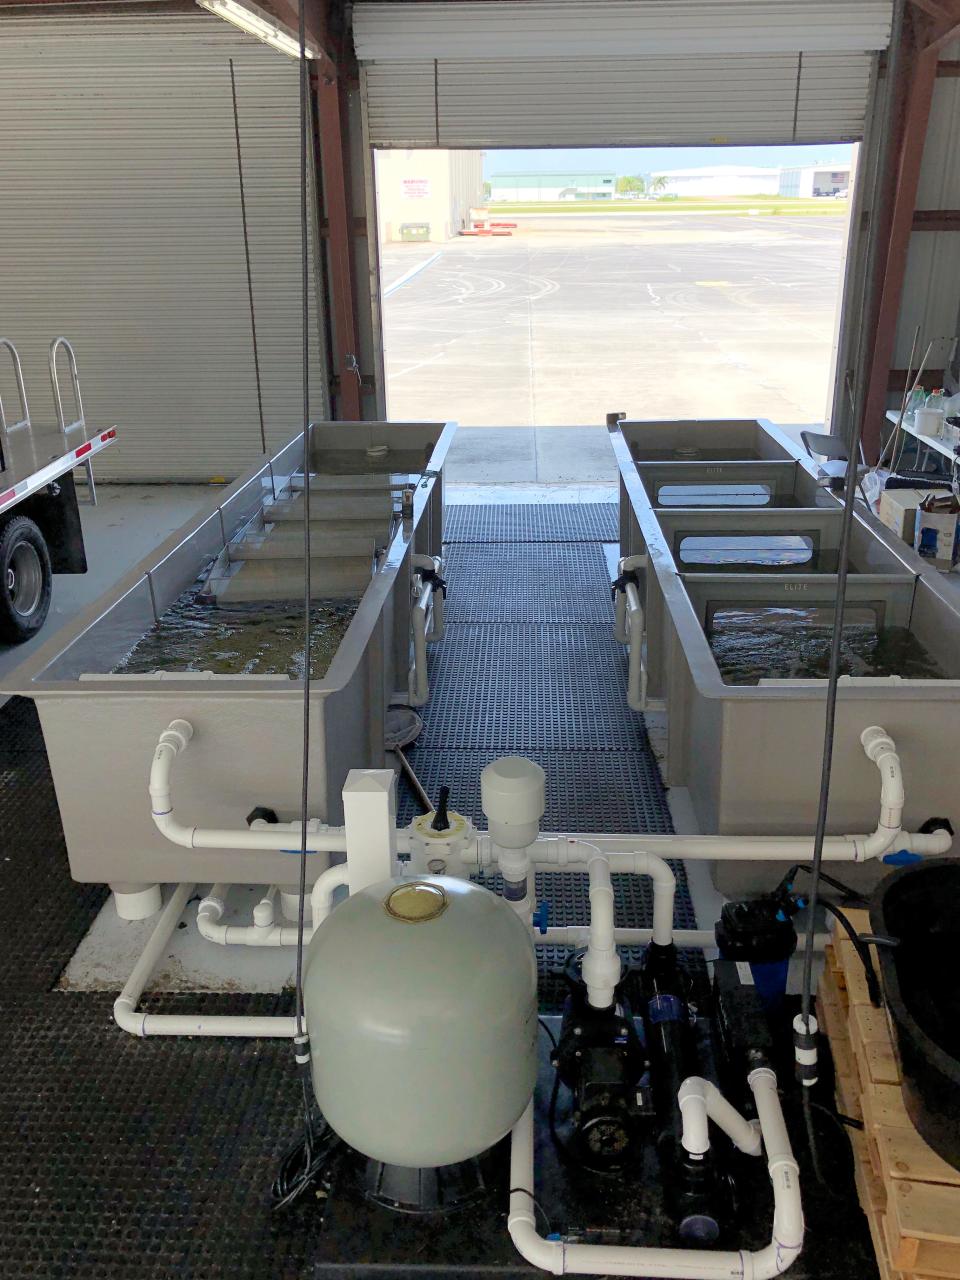 Two years ago, the Collier Mosquito Control District purchased two 800-gallon tanks to keep the mosquitofish (Gambusia holbrooki). Residents can obtain the fish at no charge by contacting the district office by phone or on their website.